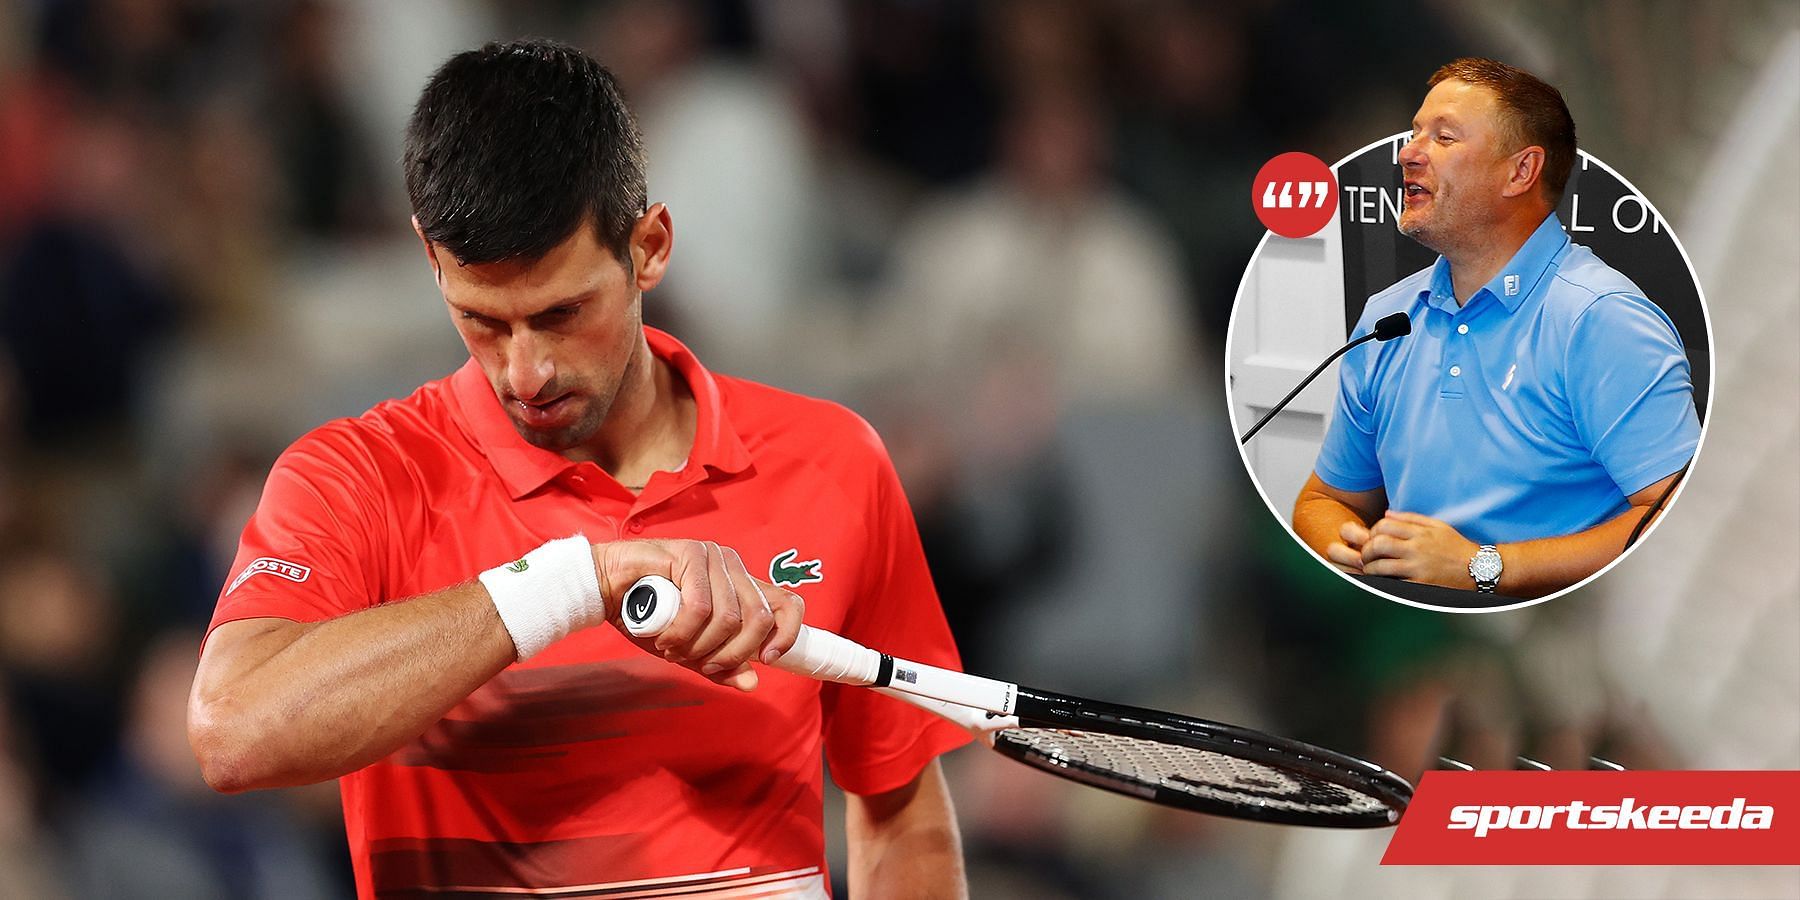 Yevgeny Kafelnikov is confident that Djokovic will bounce back and have chances to win Grand Slams.